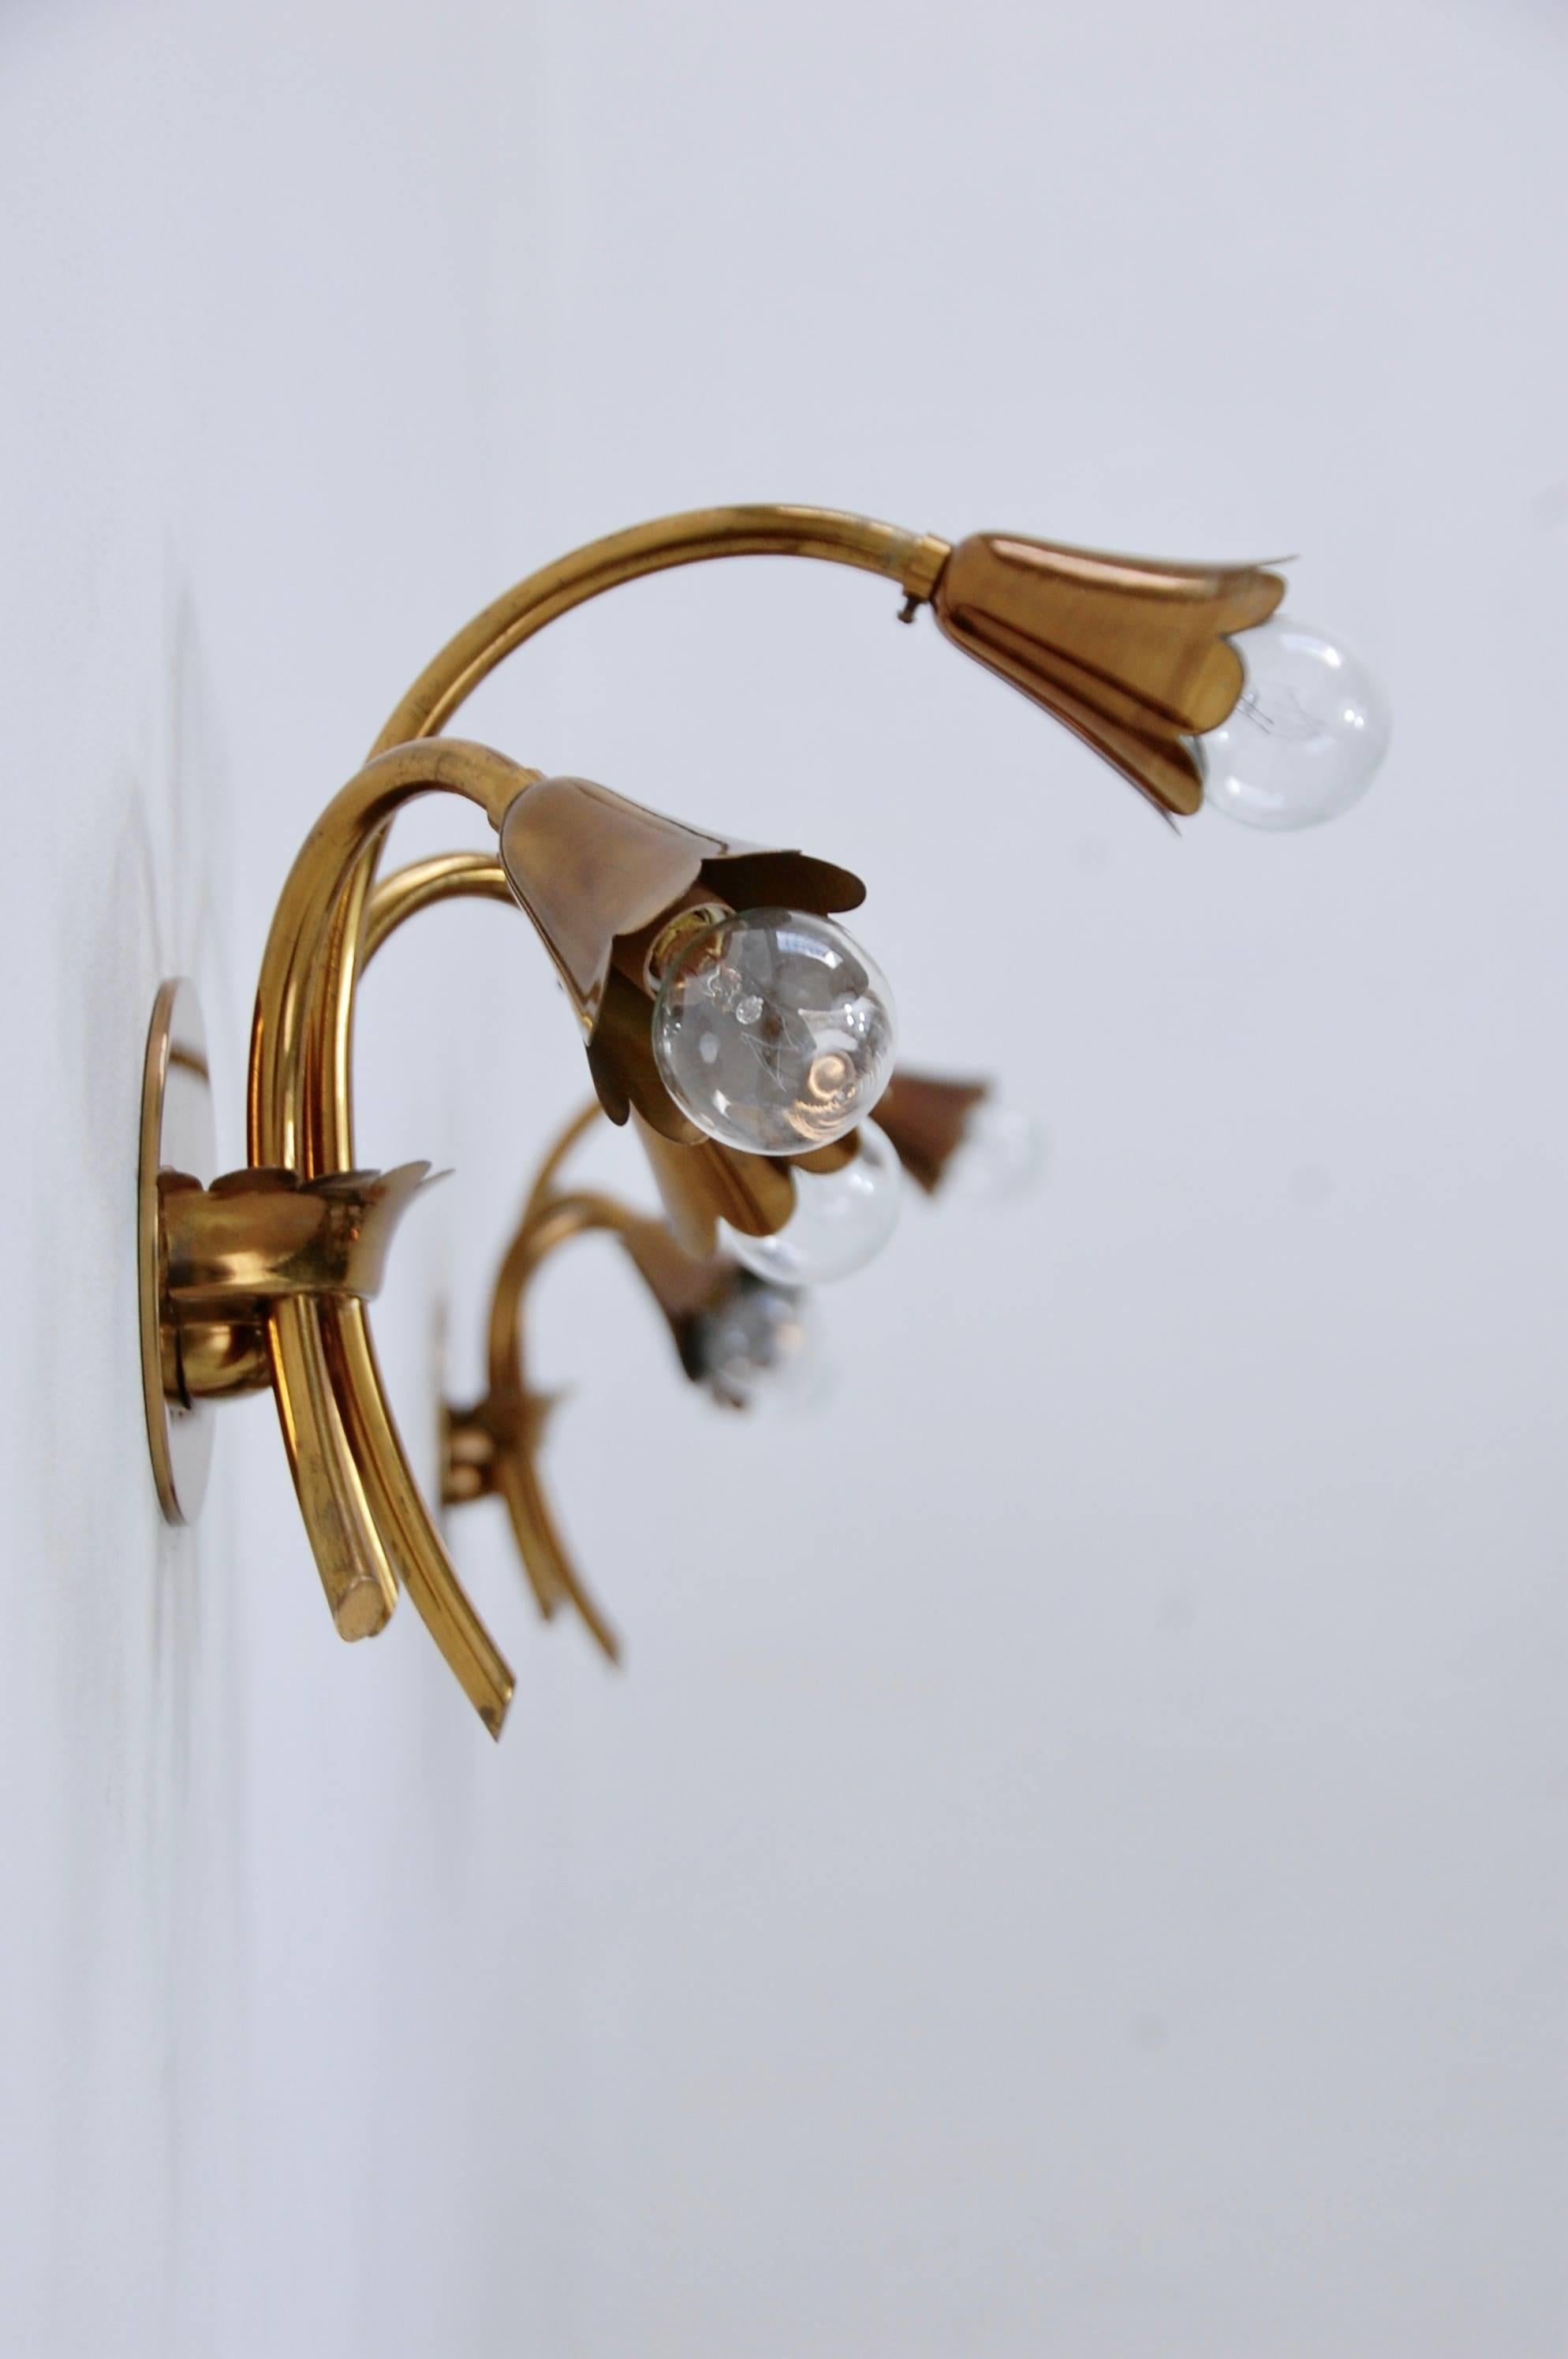 Classic Italian brass sconces in original finish with botanical motif. Partially restored. Adapted for use in the US.